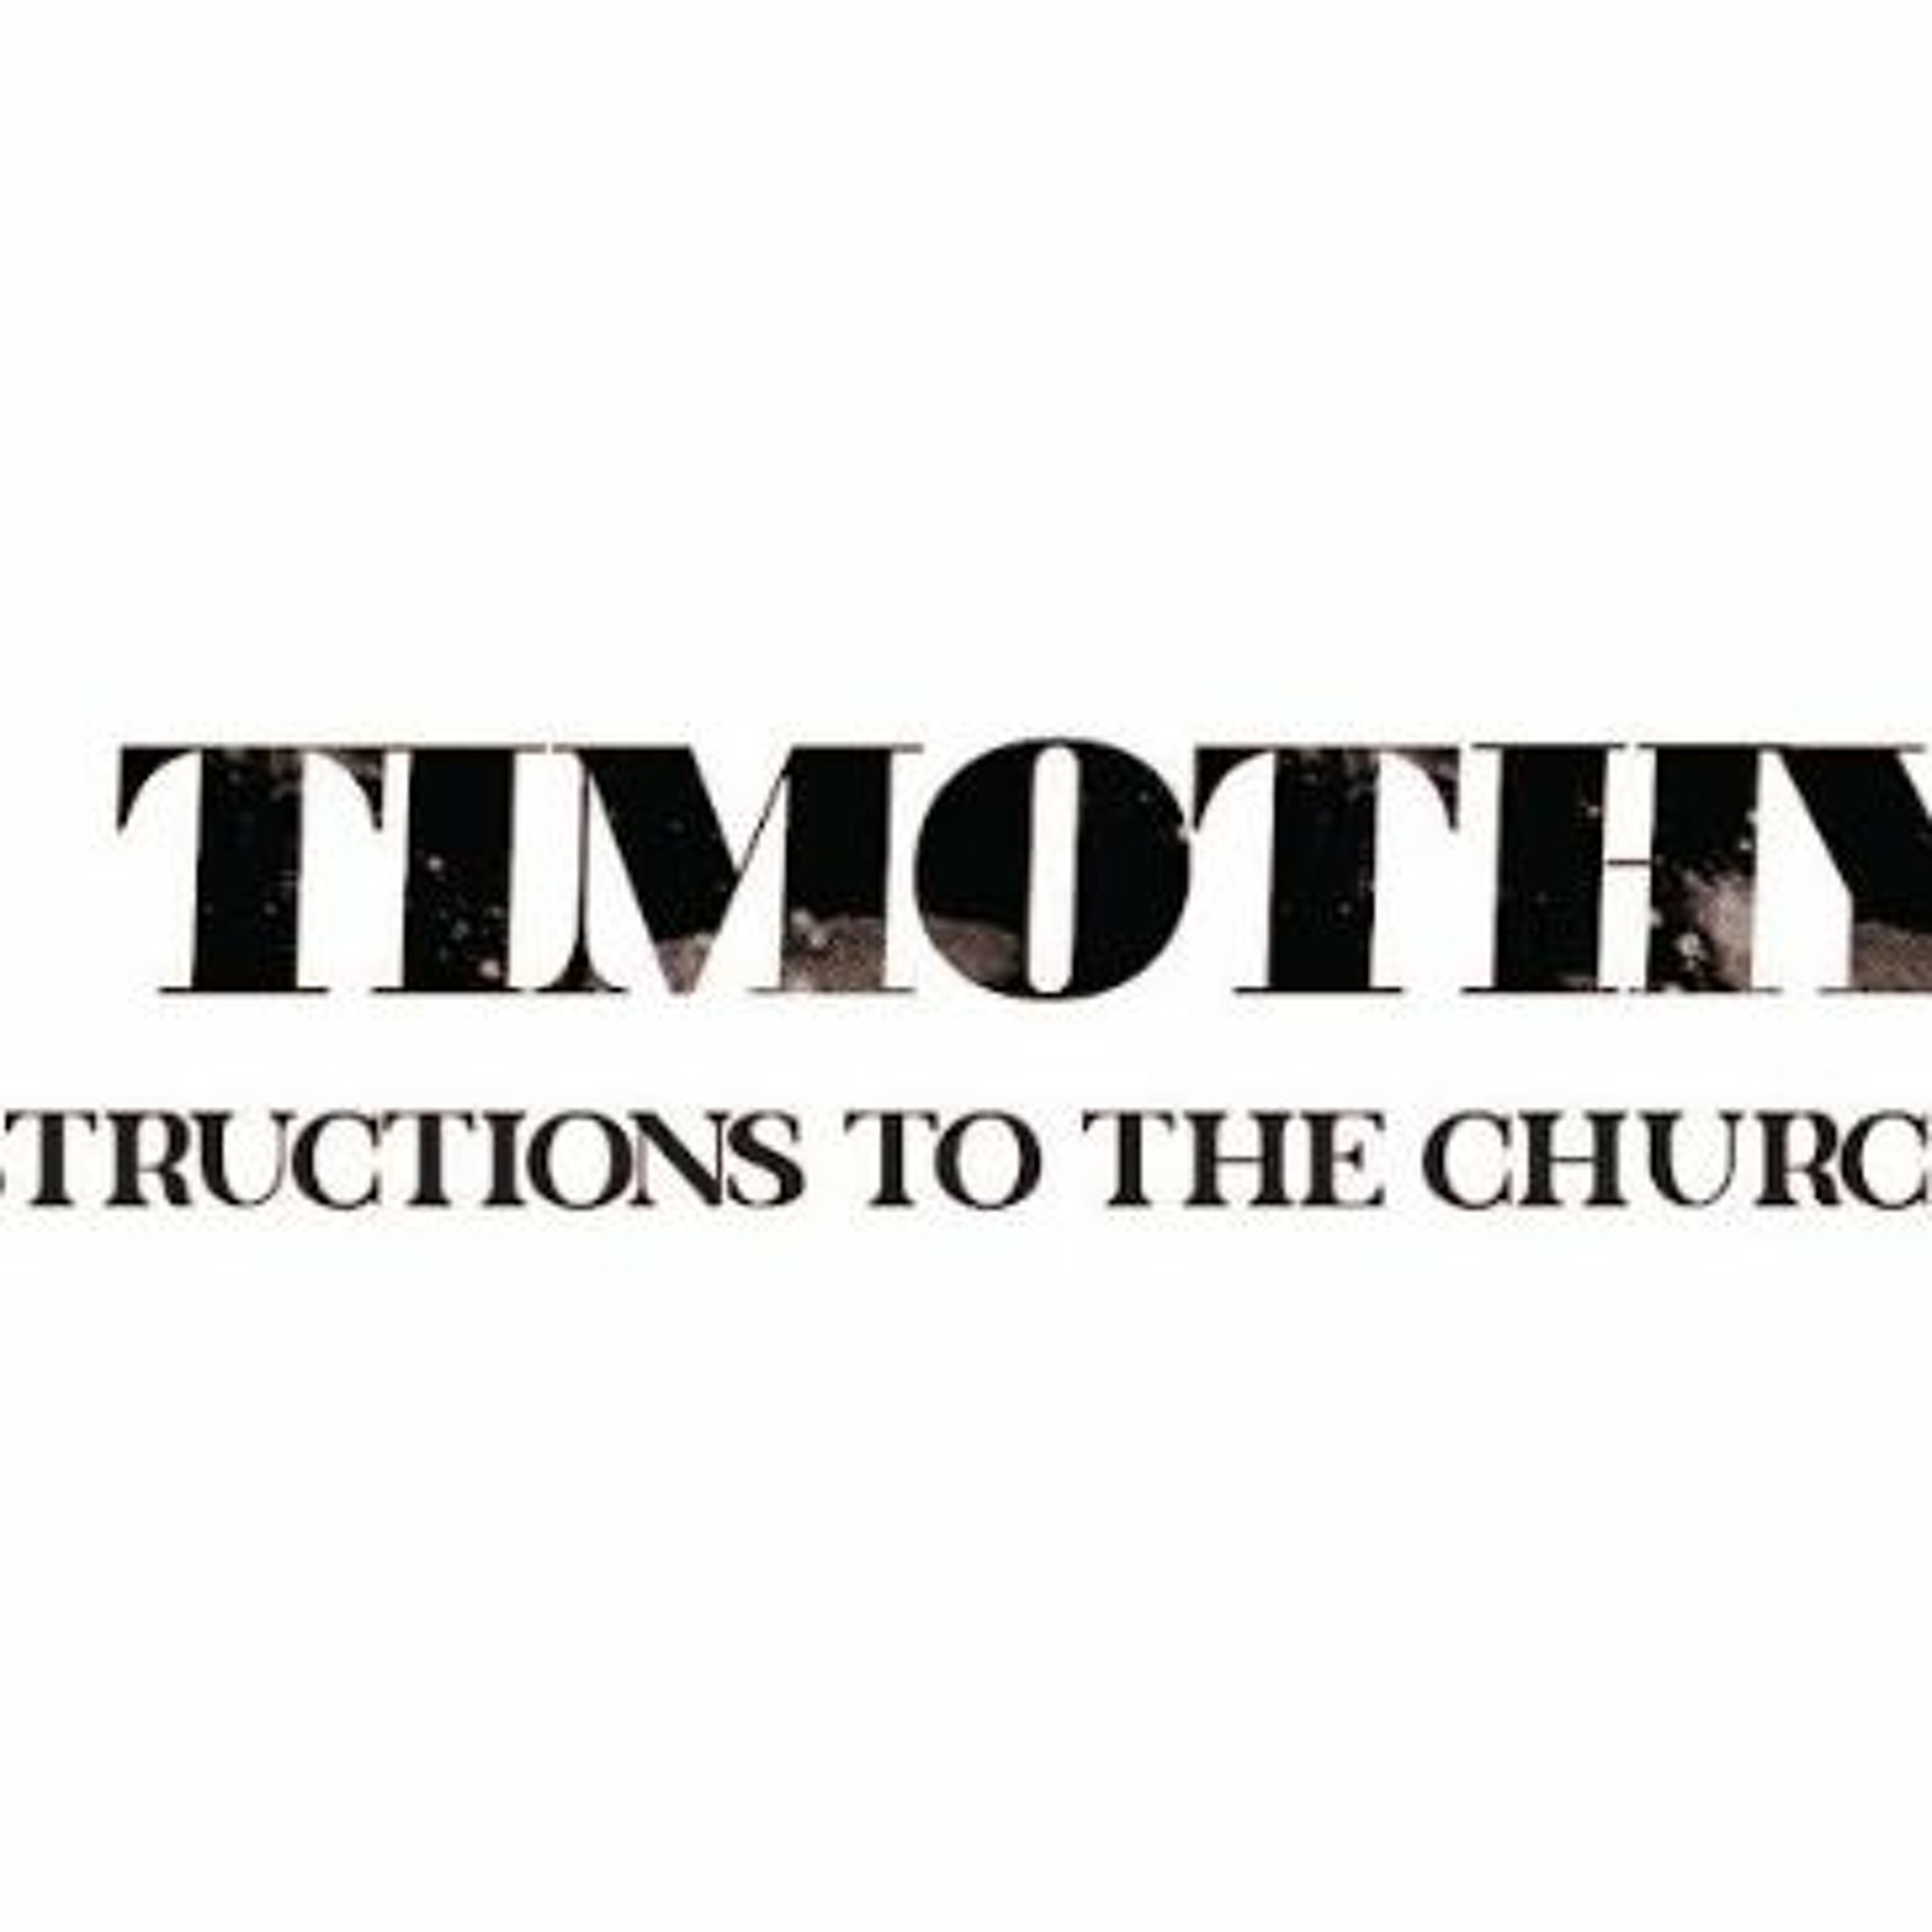 A Charge to Slaves: 1 Timothy-Instructions for the Church (19)- December 4, 2022